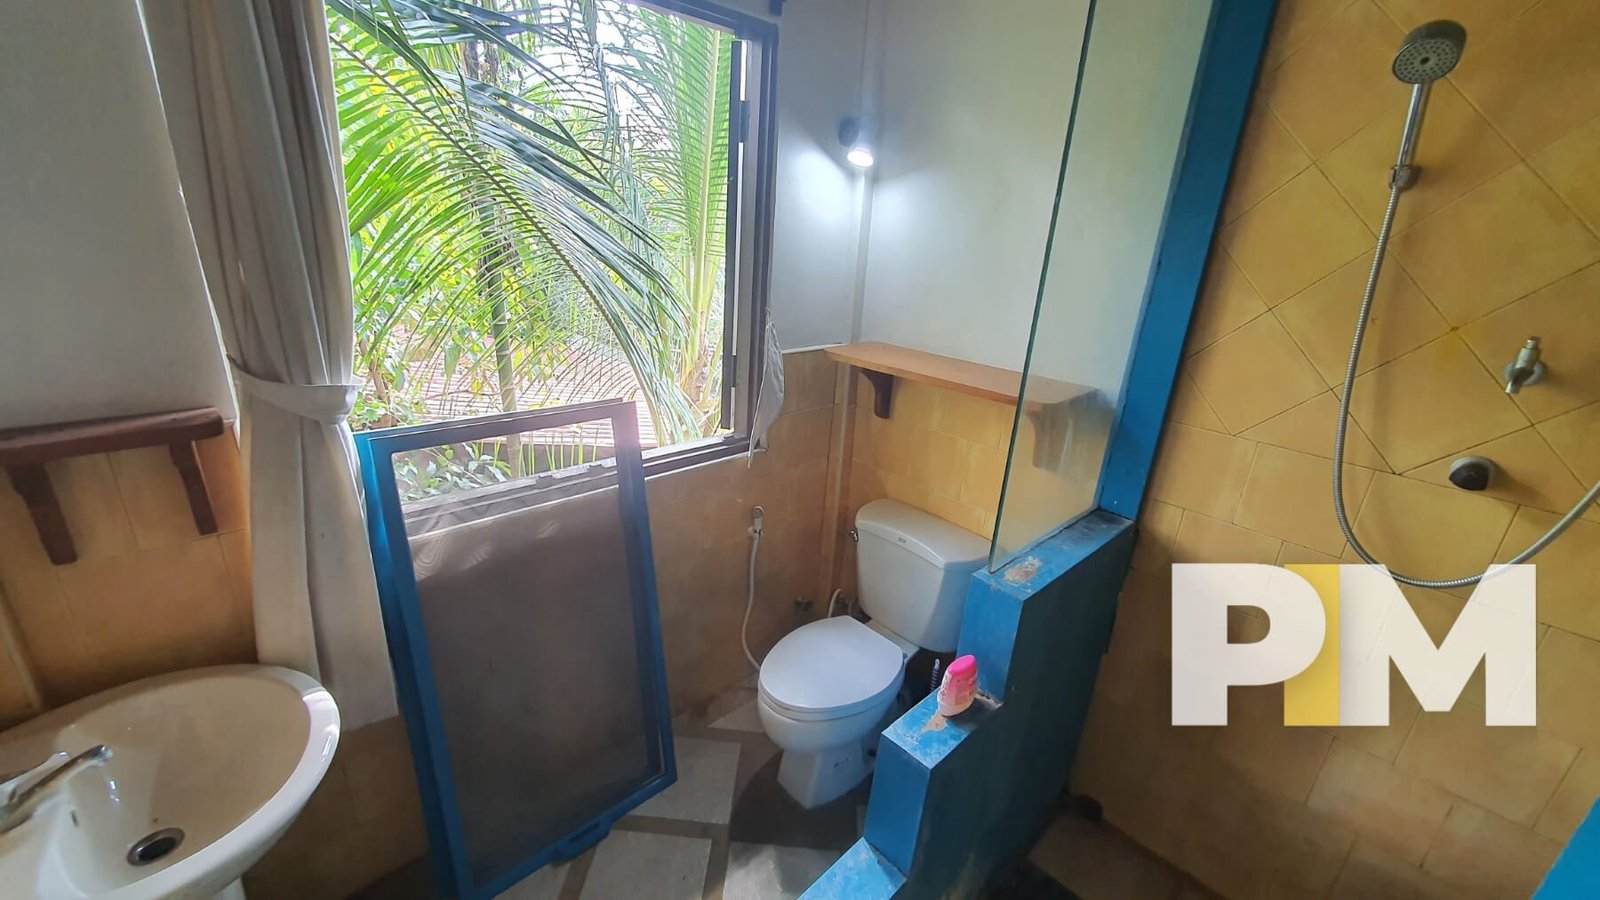 Tiolet room with sink - Real Estate in Yangon